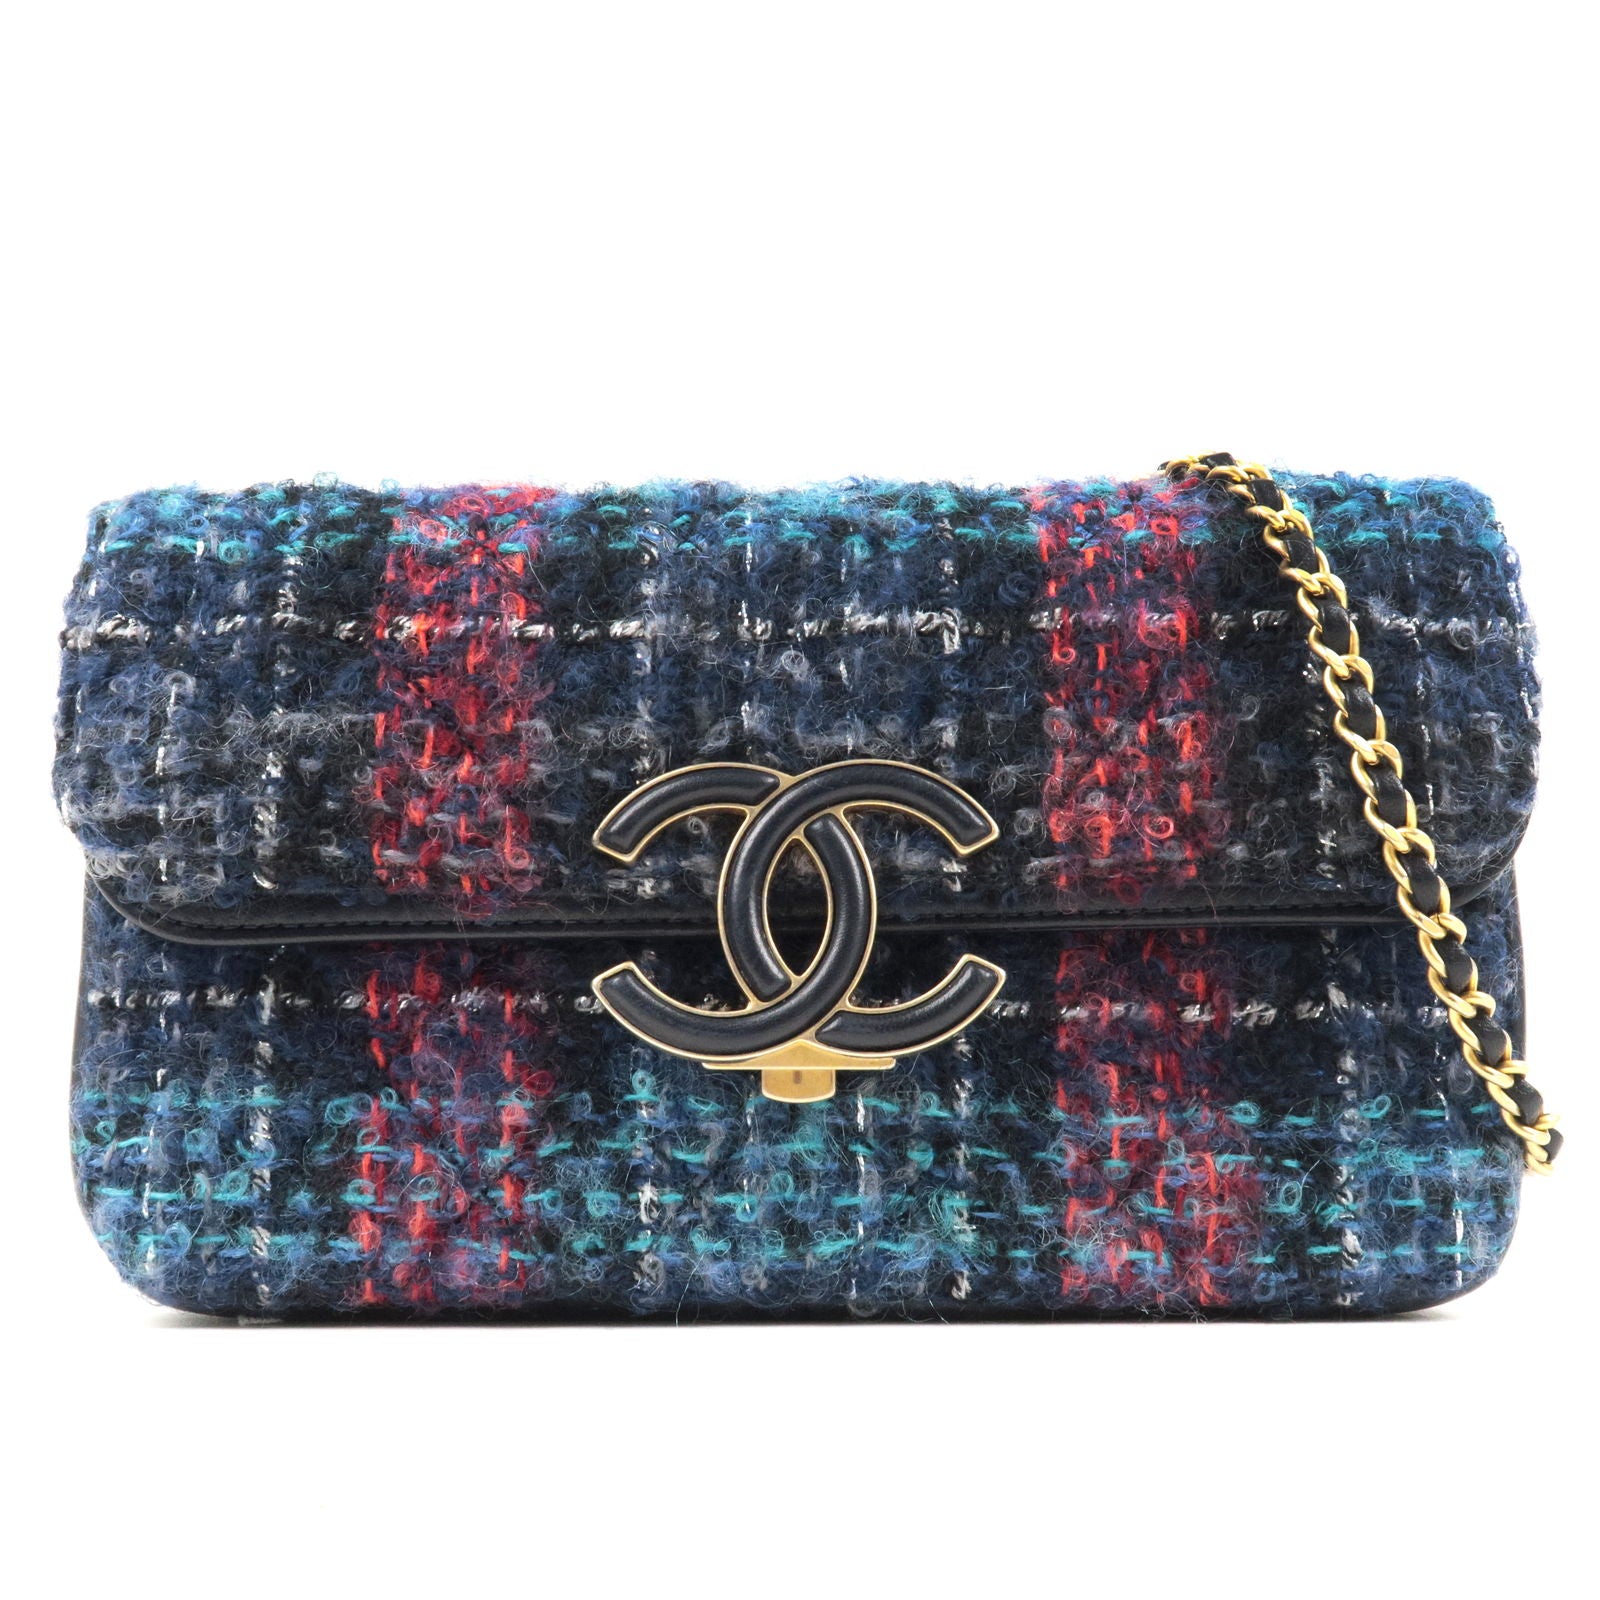 CHANEL-Tweed-Leather-Double-Flap-Chain-Shoulder-Bag-Navy